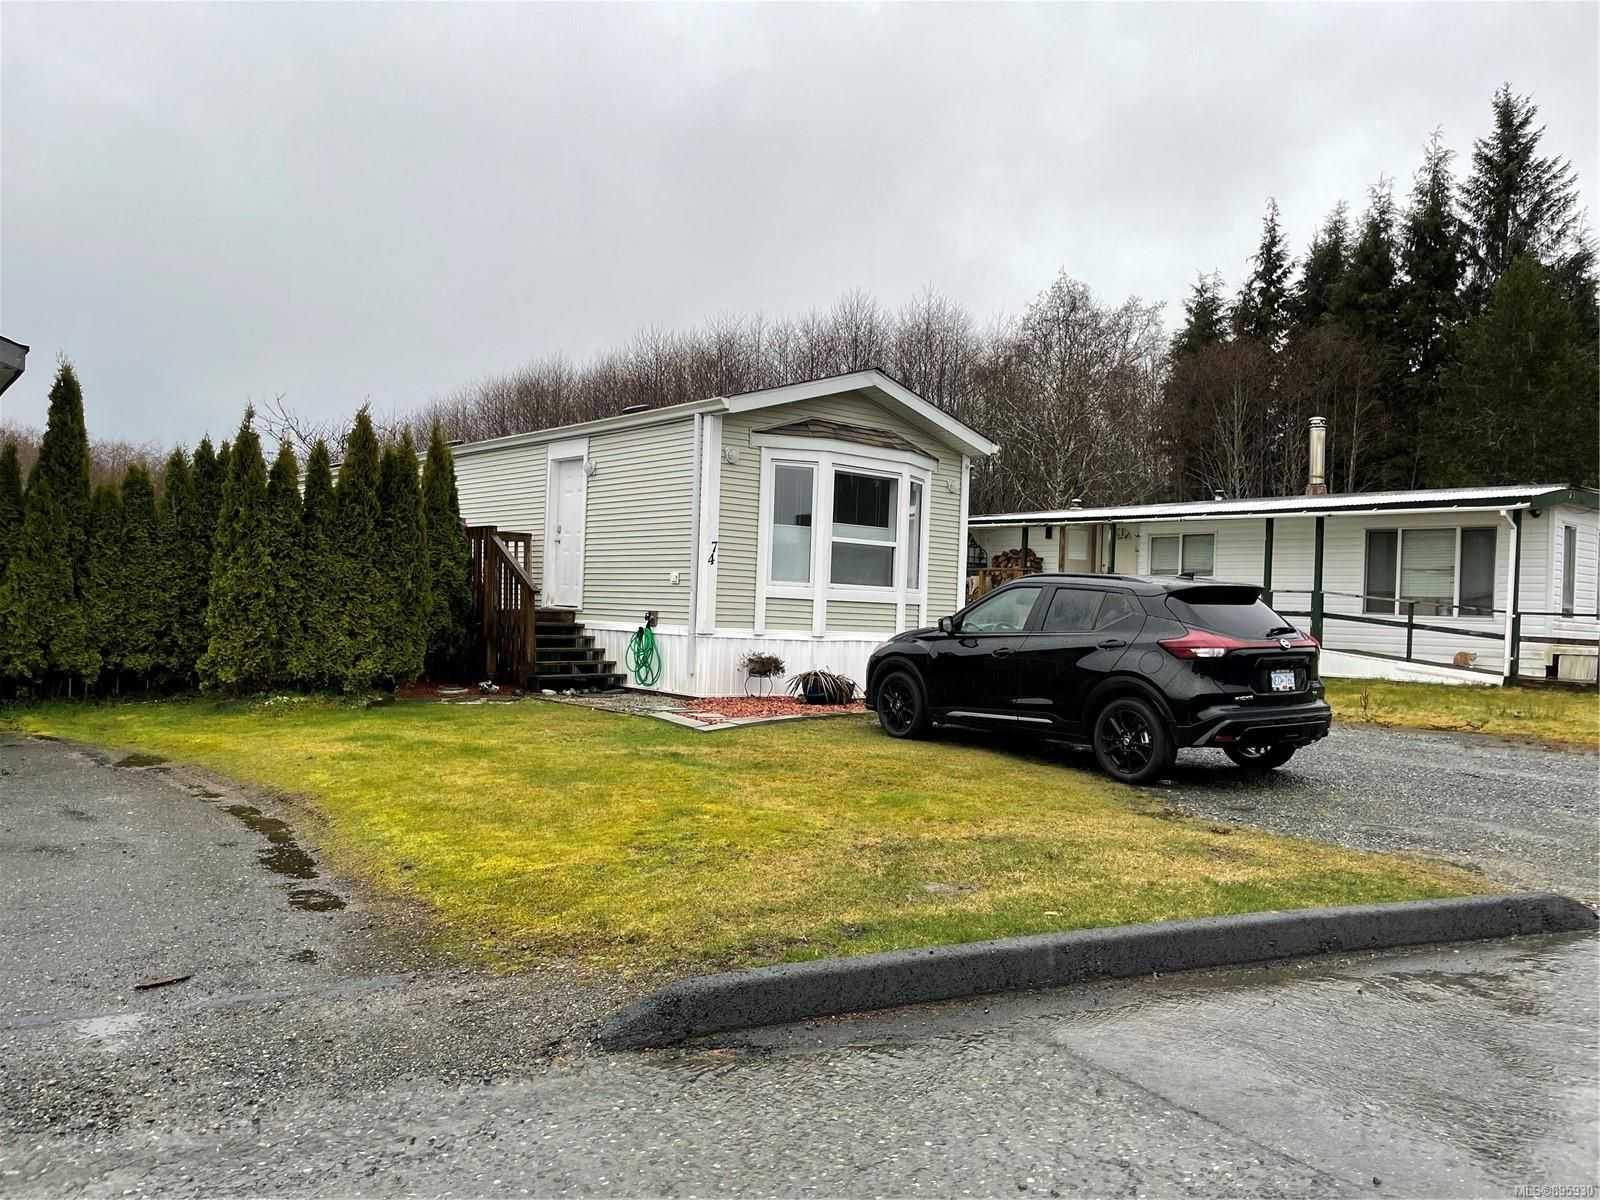 House in Port Hardy, British Columbia 10151007